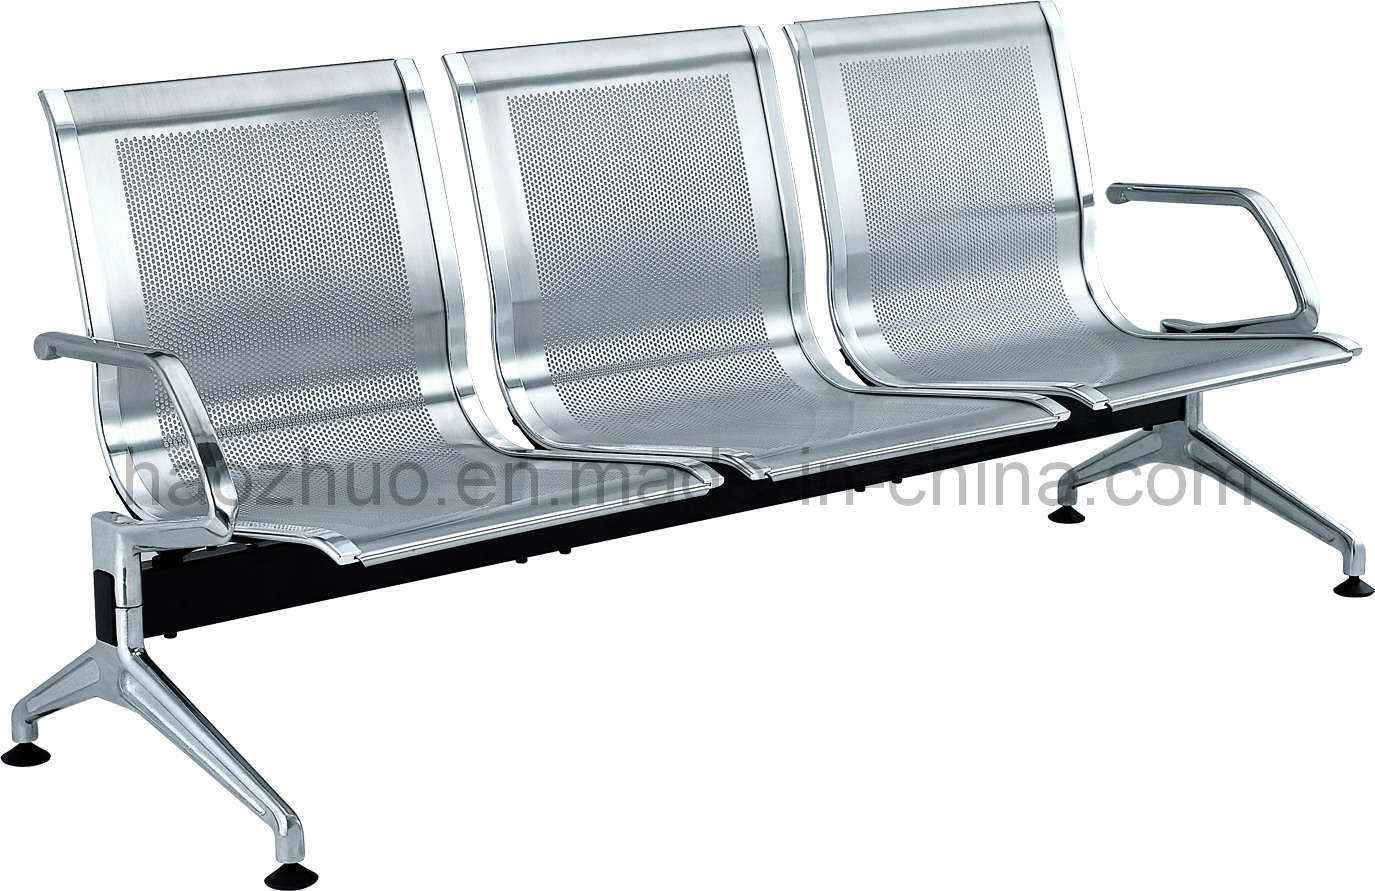 Airport Seating / Public Chair